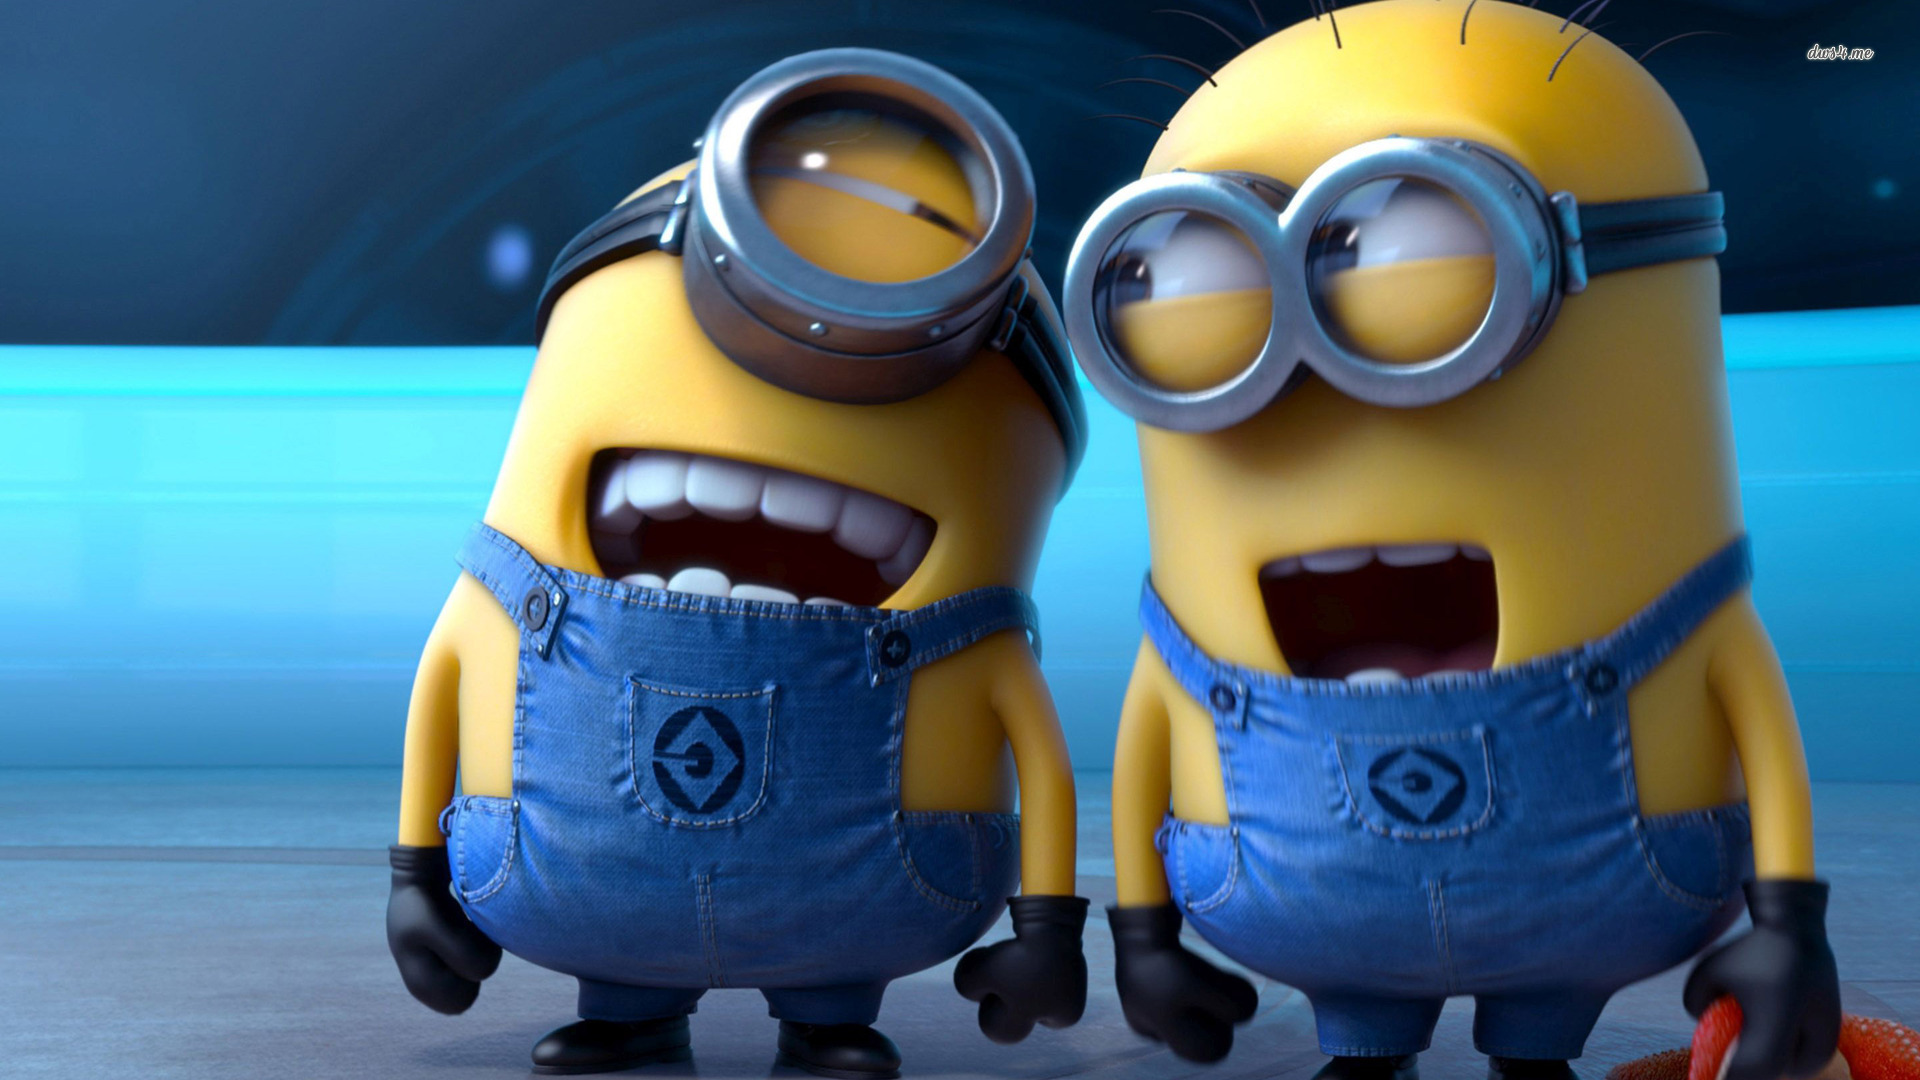 the minions full movie online in spanish